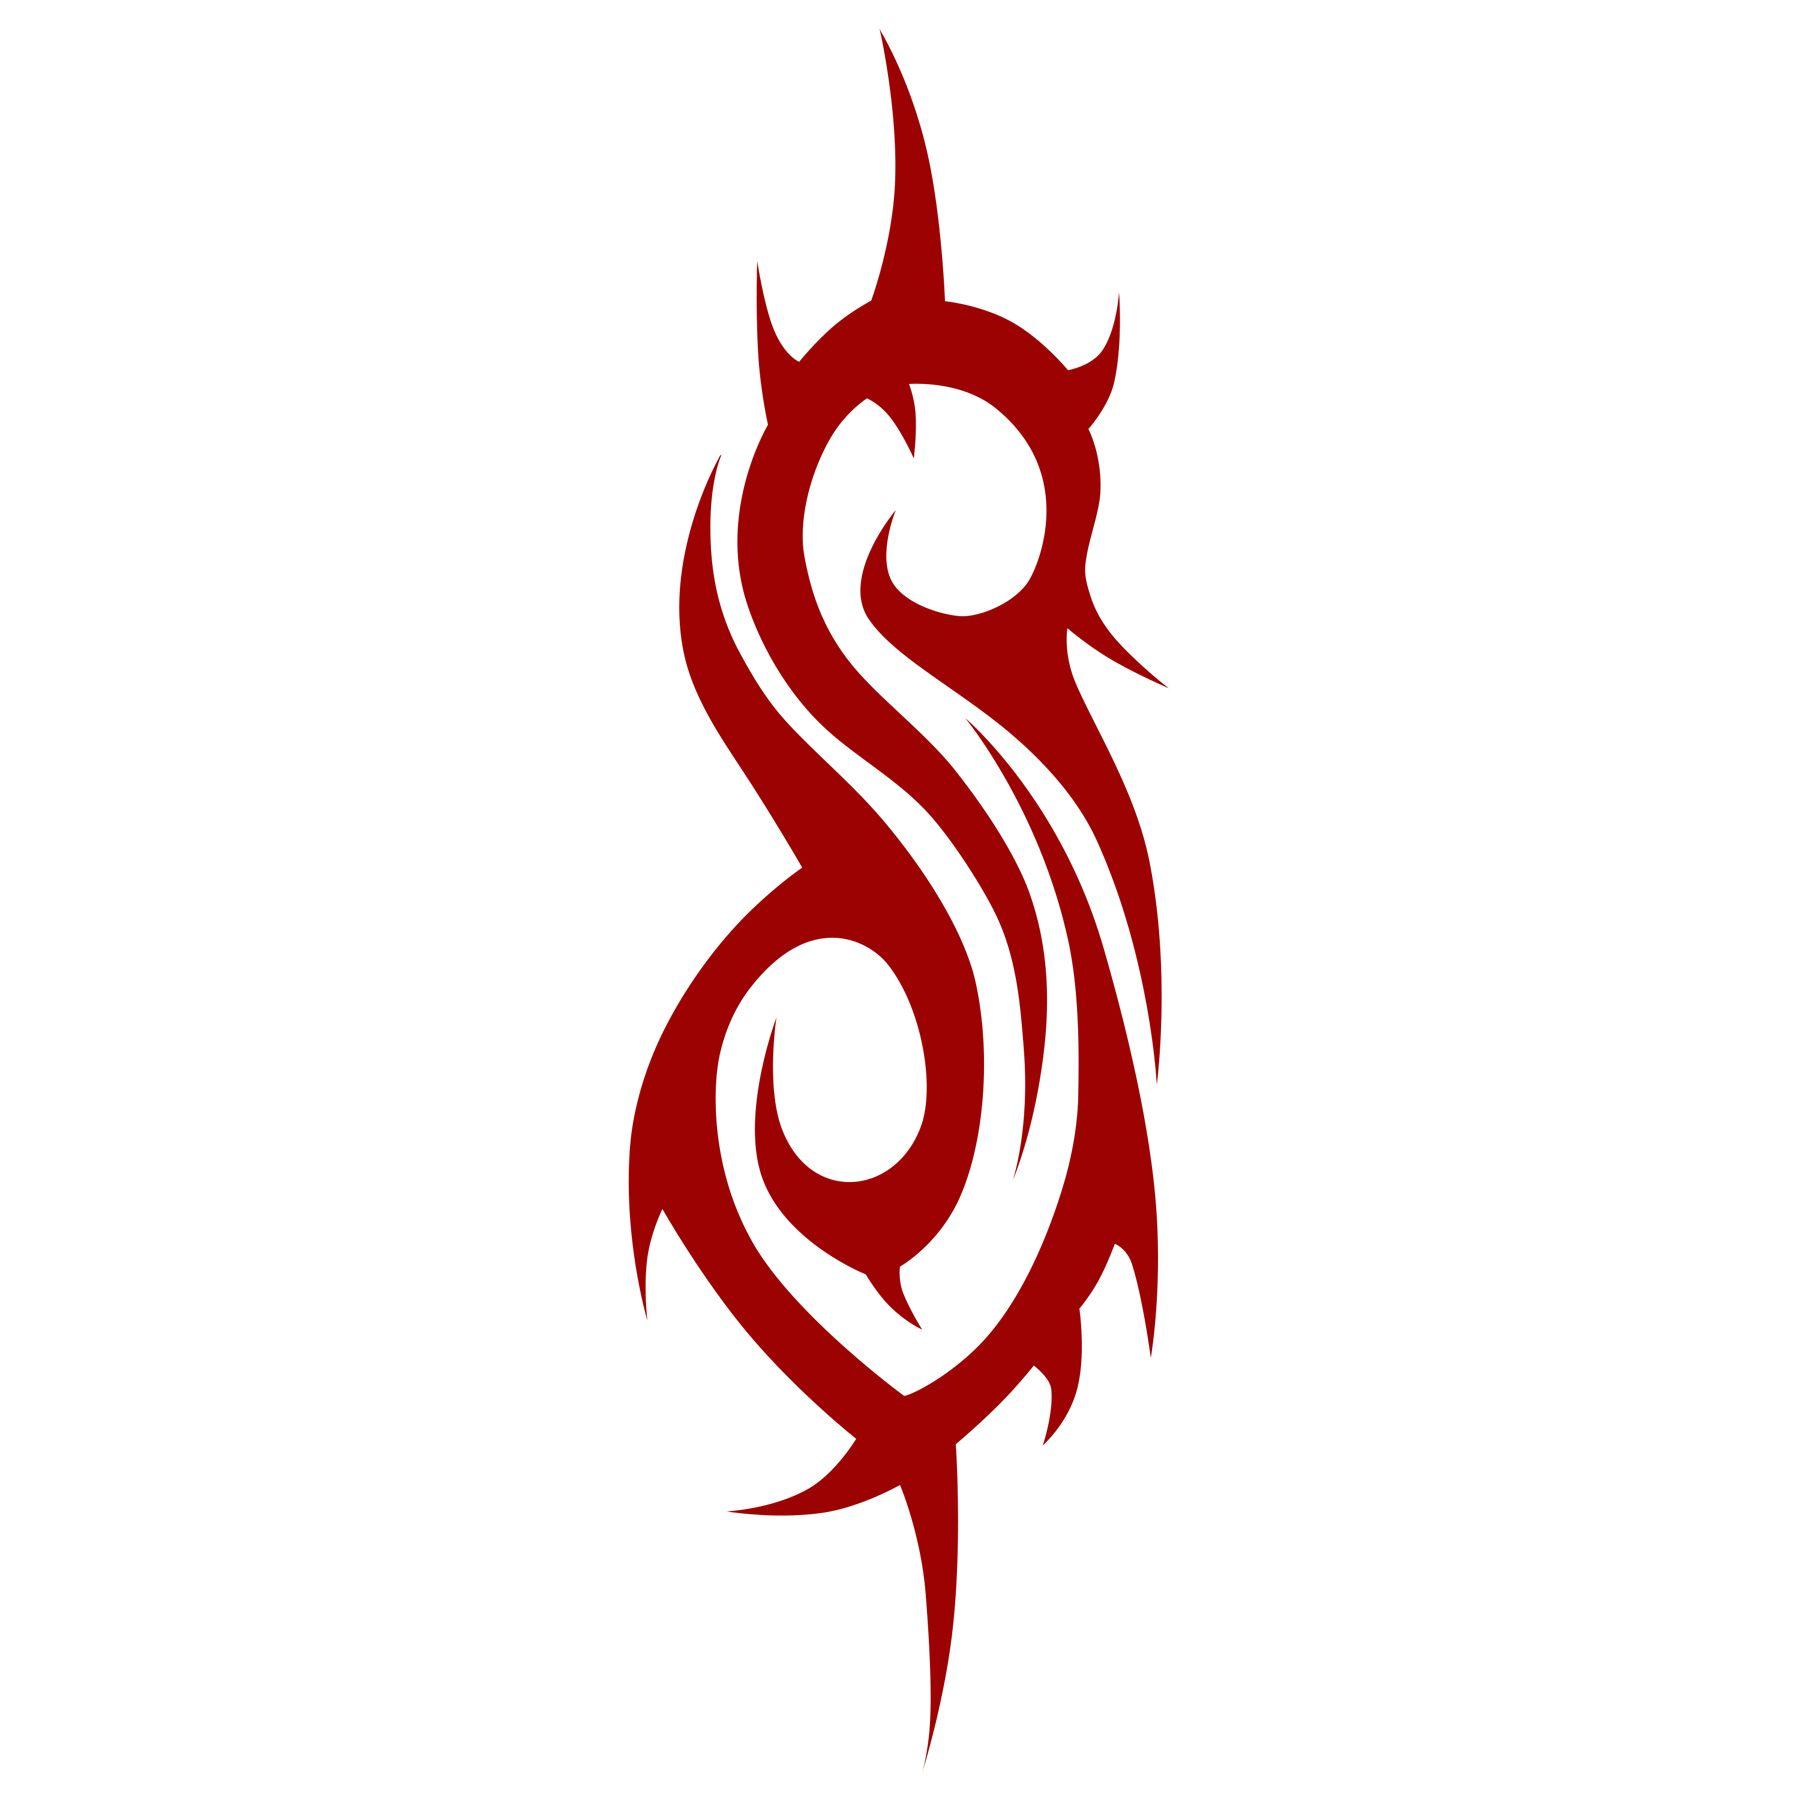 Red Slipknot Logo - Slipknot Logo, Slipknot Symbol, Meaning, History and Evolution